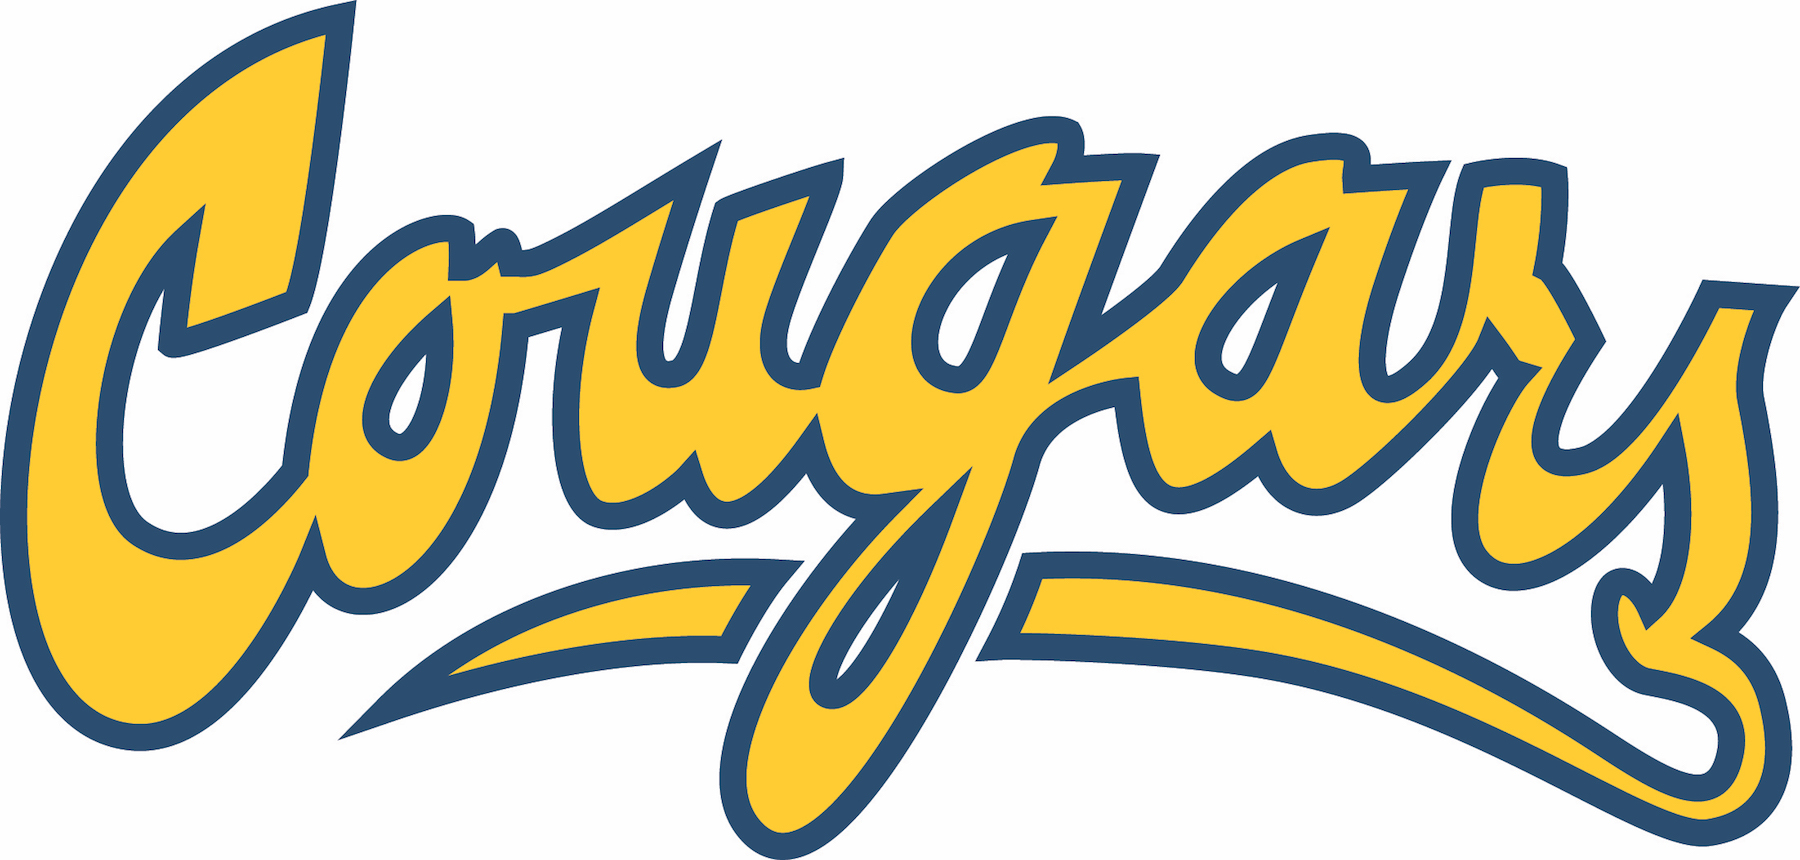 College of the Canyons athletics script logo.